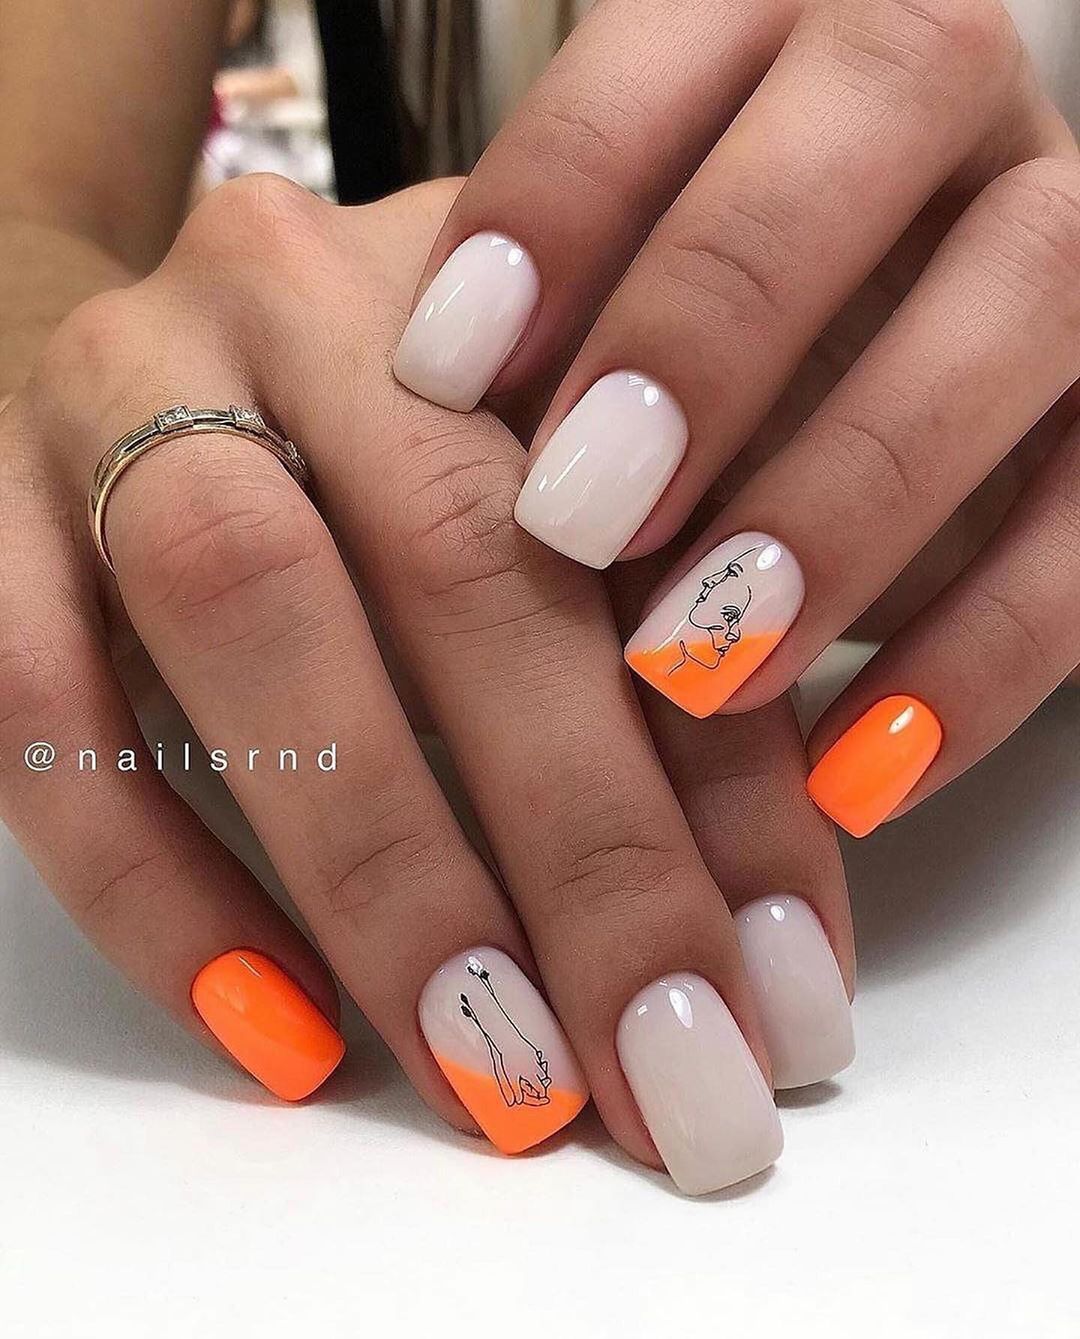 25 Trending Summer Nail Colors And Designs For 2021 images 9